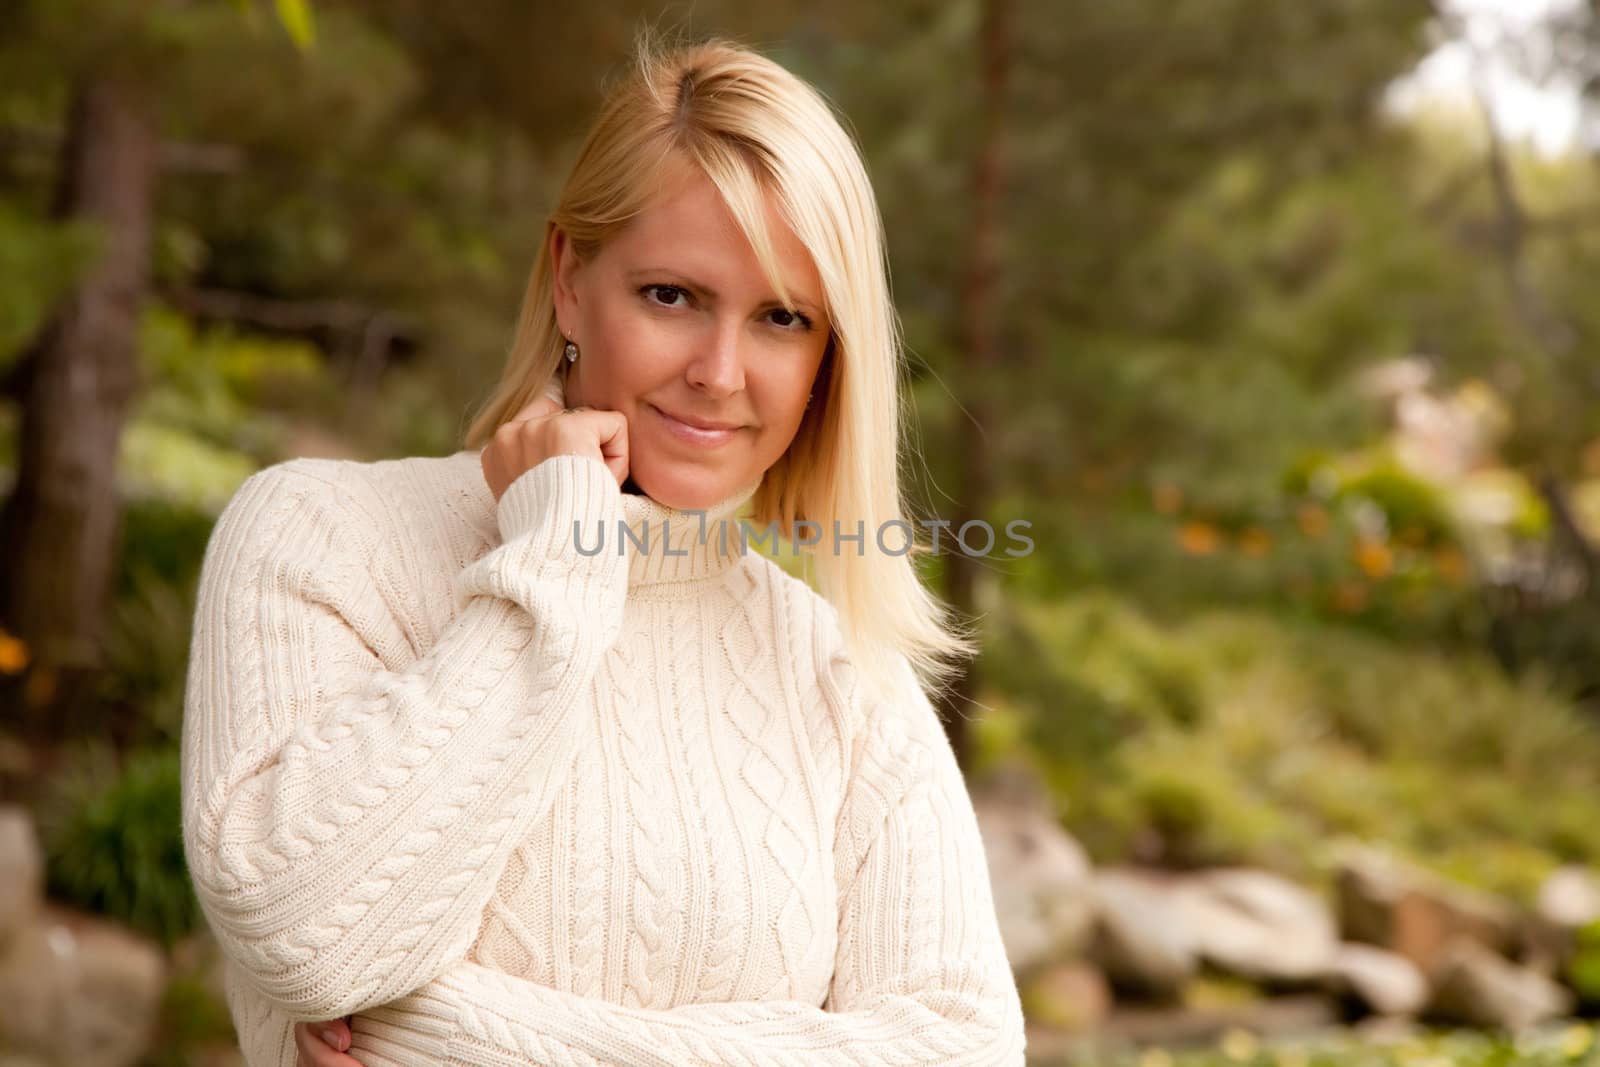 Attractive Blonde Woman Portrait in the Park.